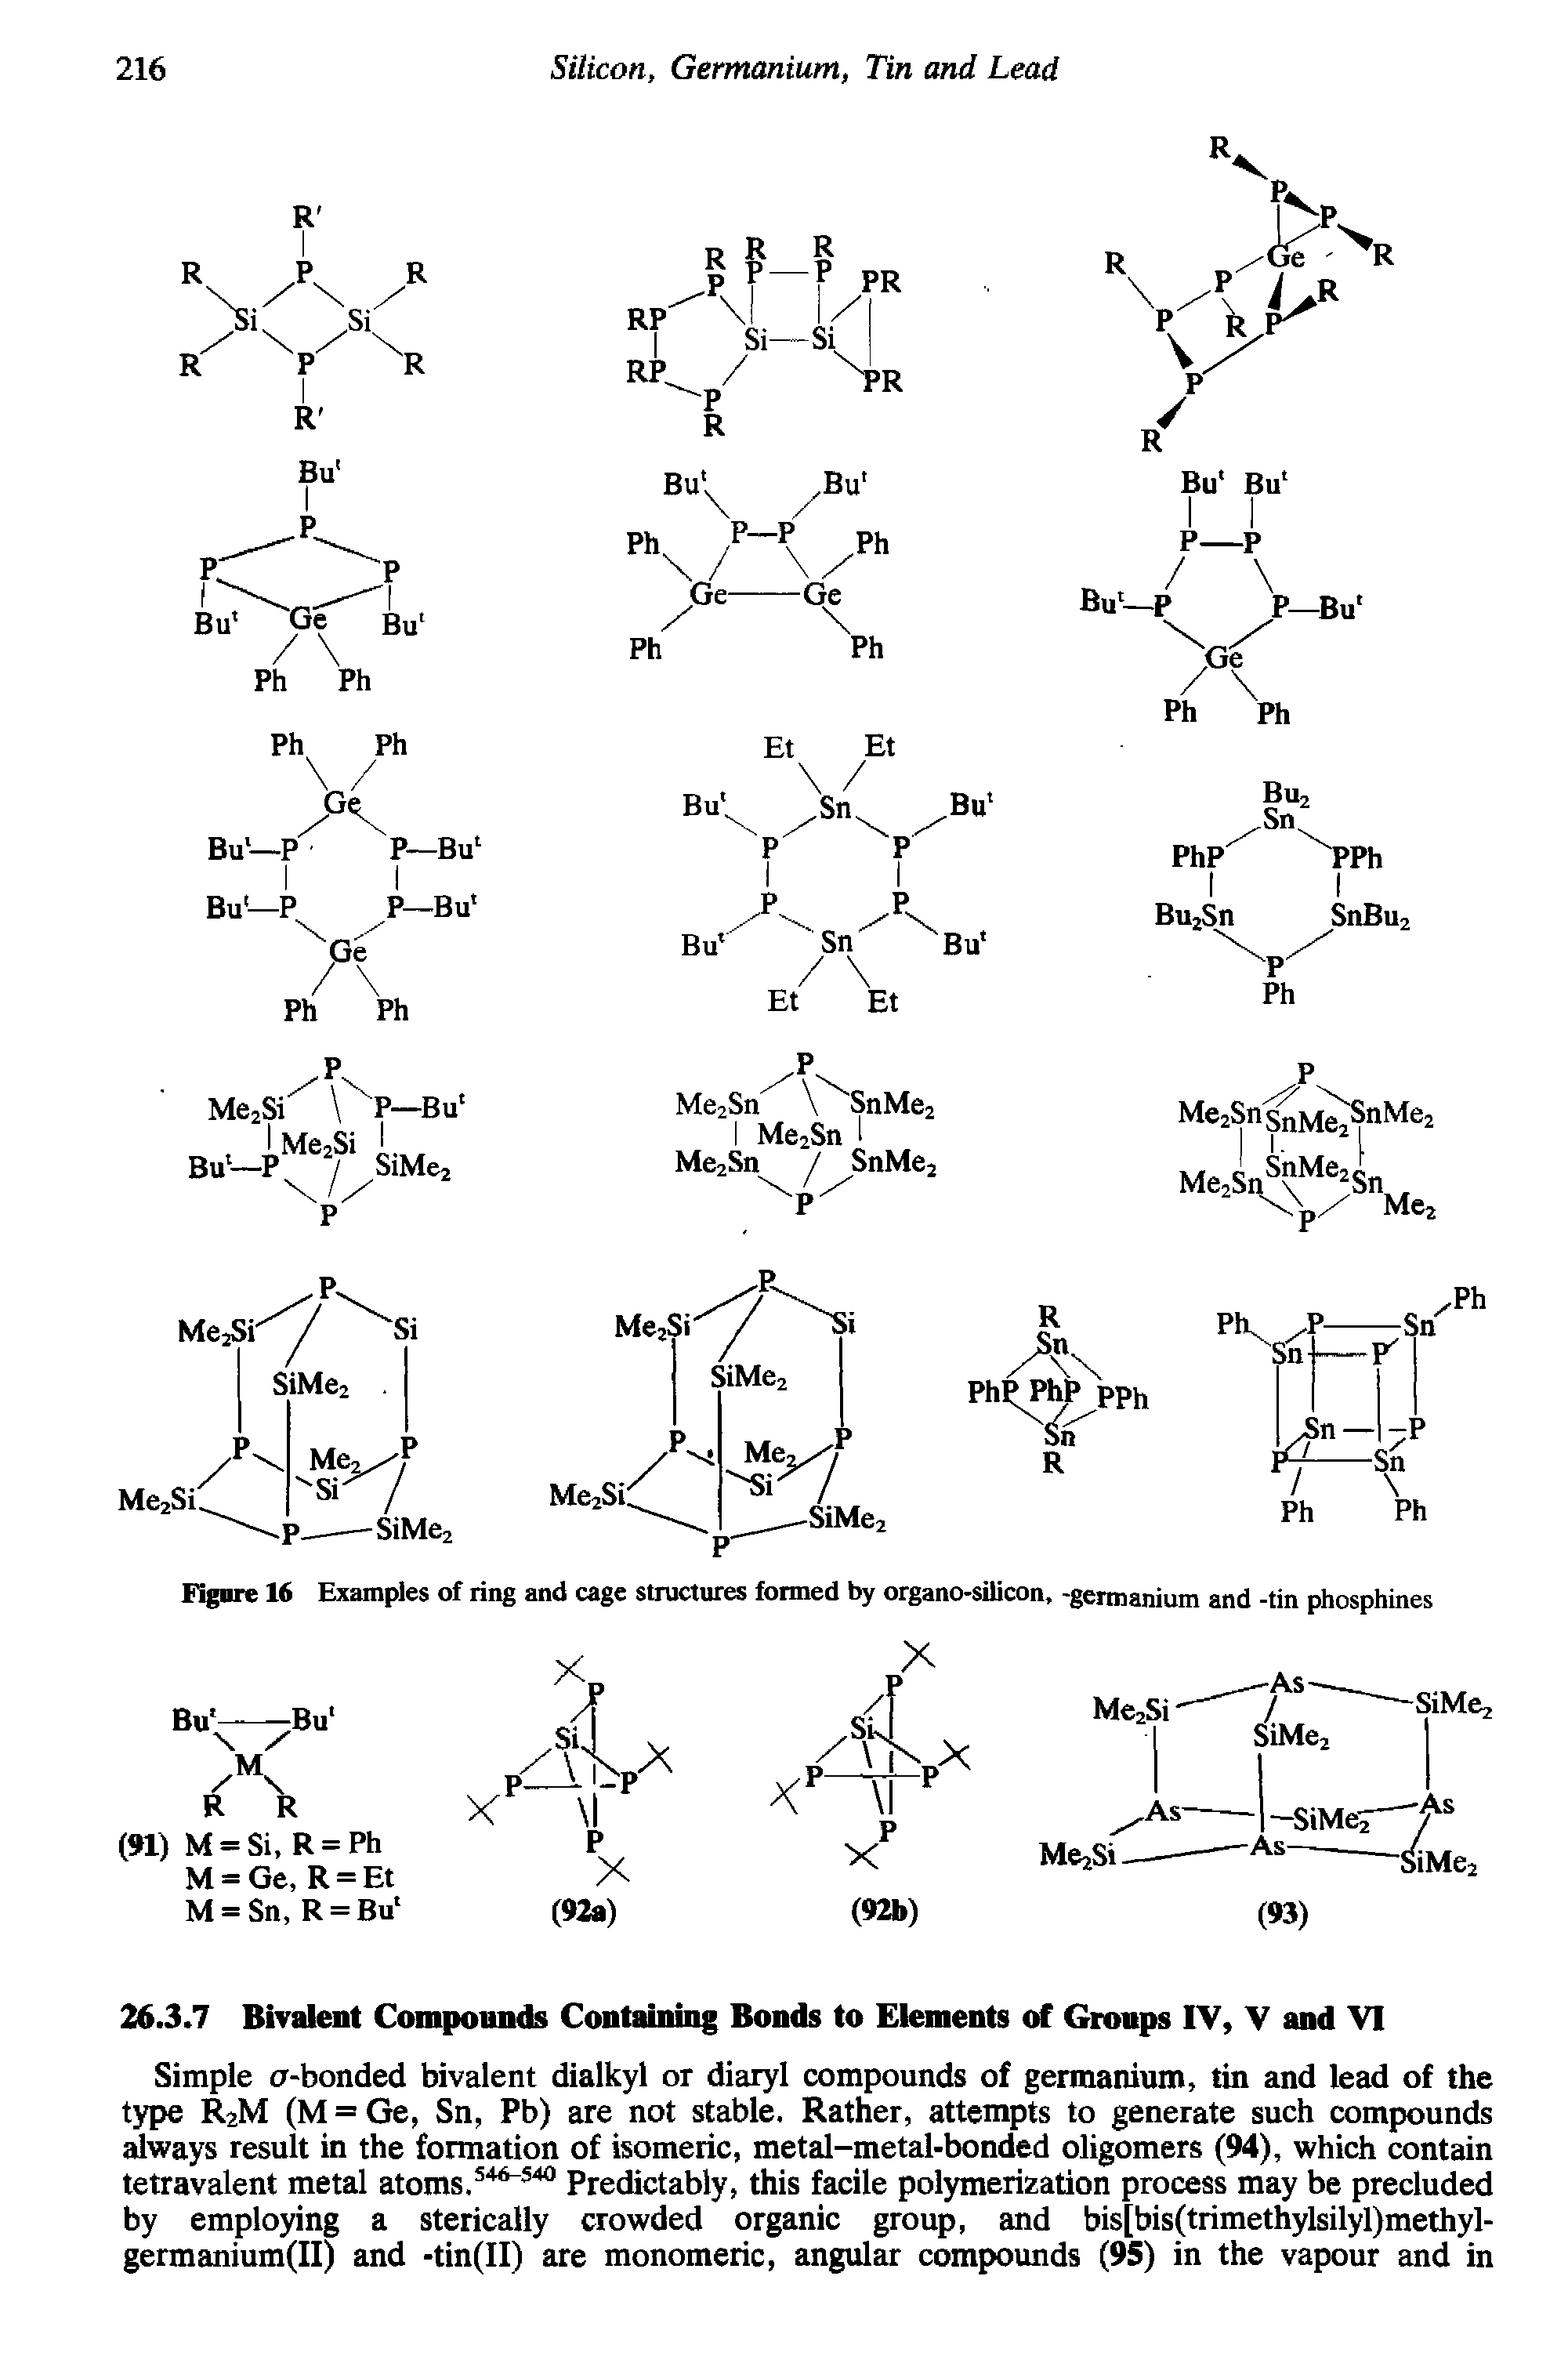 Figure 16 Examples of ring and cage structures formed by organo-silicon, -germanium and -tin phosphines...